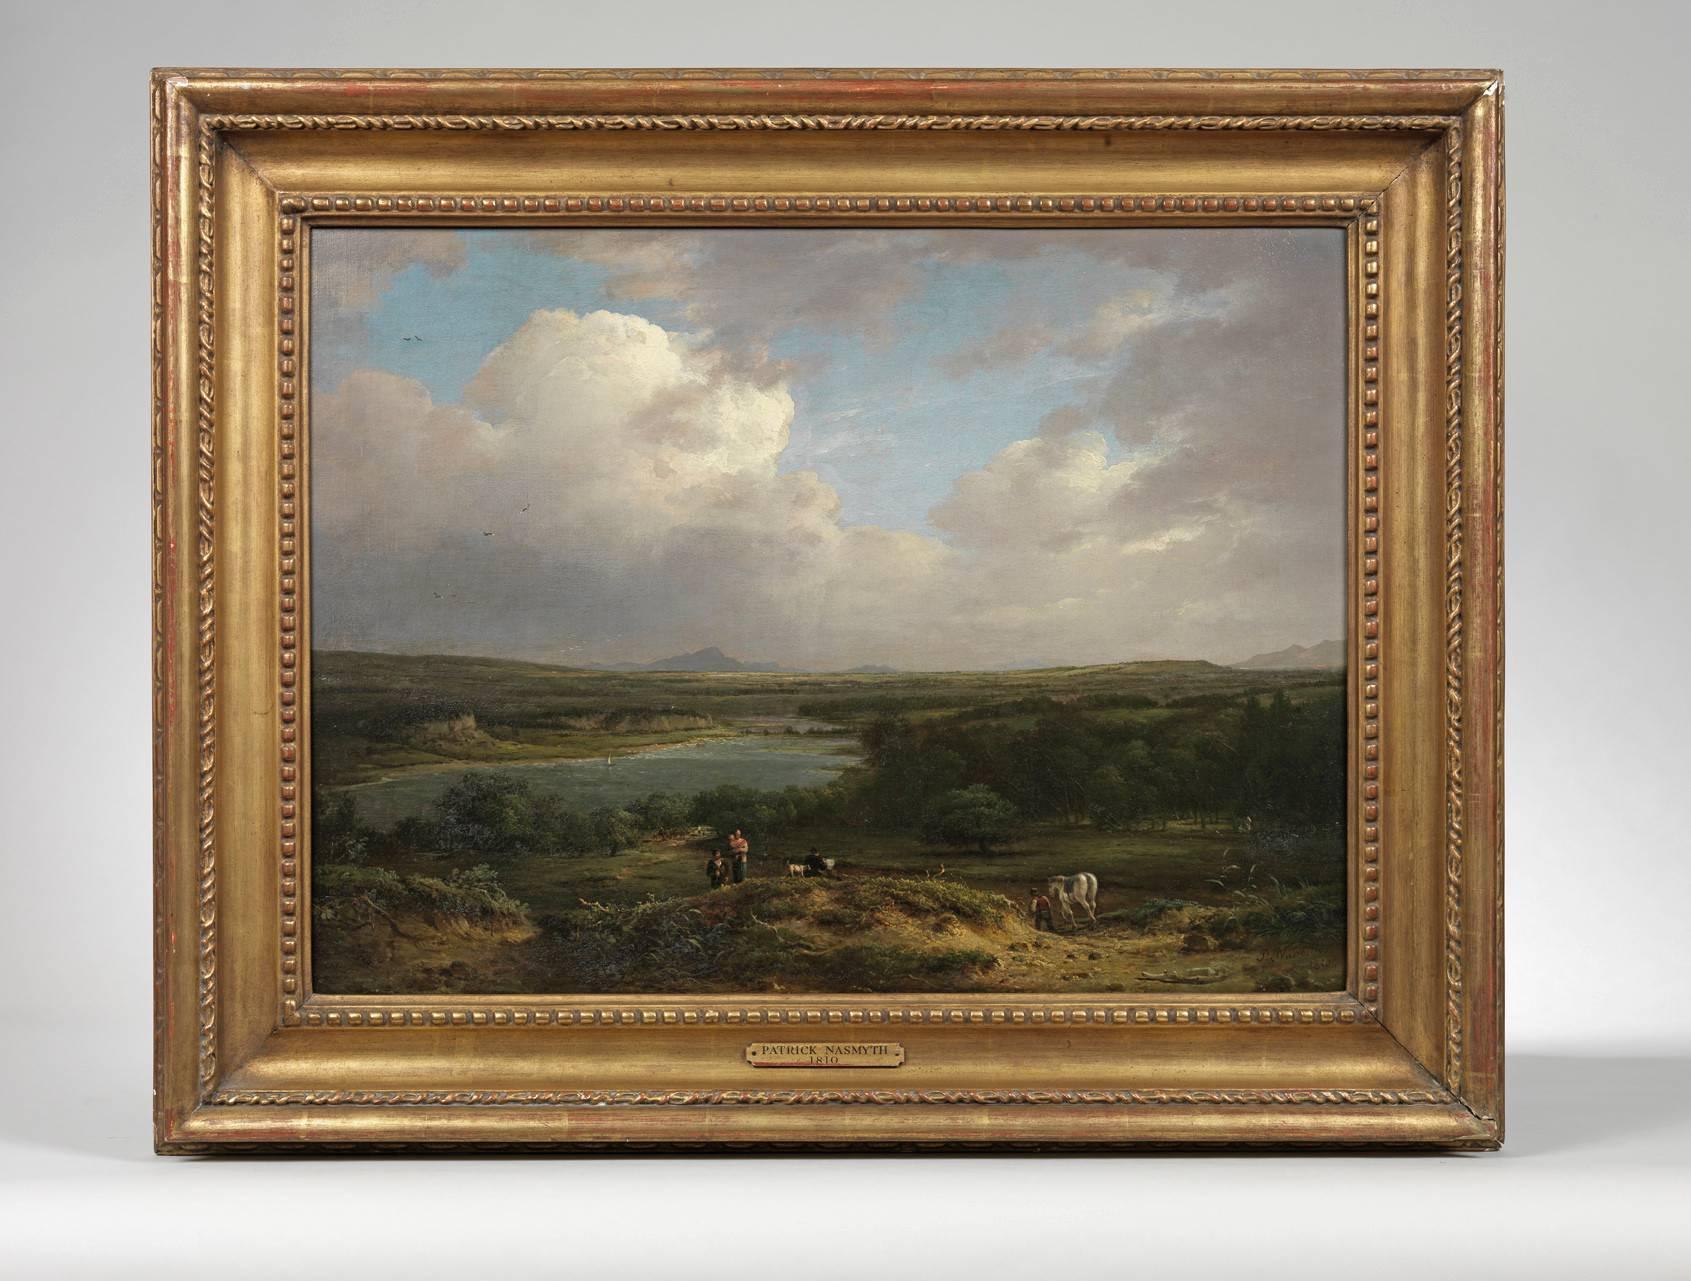 Patrick Nasmyth (Scottish, 1787- 1831) 
Figures in a Landscape 
Signed and dated, 'P. Nasmyth / 1810, lower right corner 
oil on canvas 

Held in a giltwood frame.

Provenance
The Collection of the late Sir Peter and Lady Crossman, Tetworth